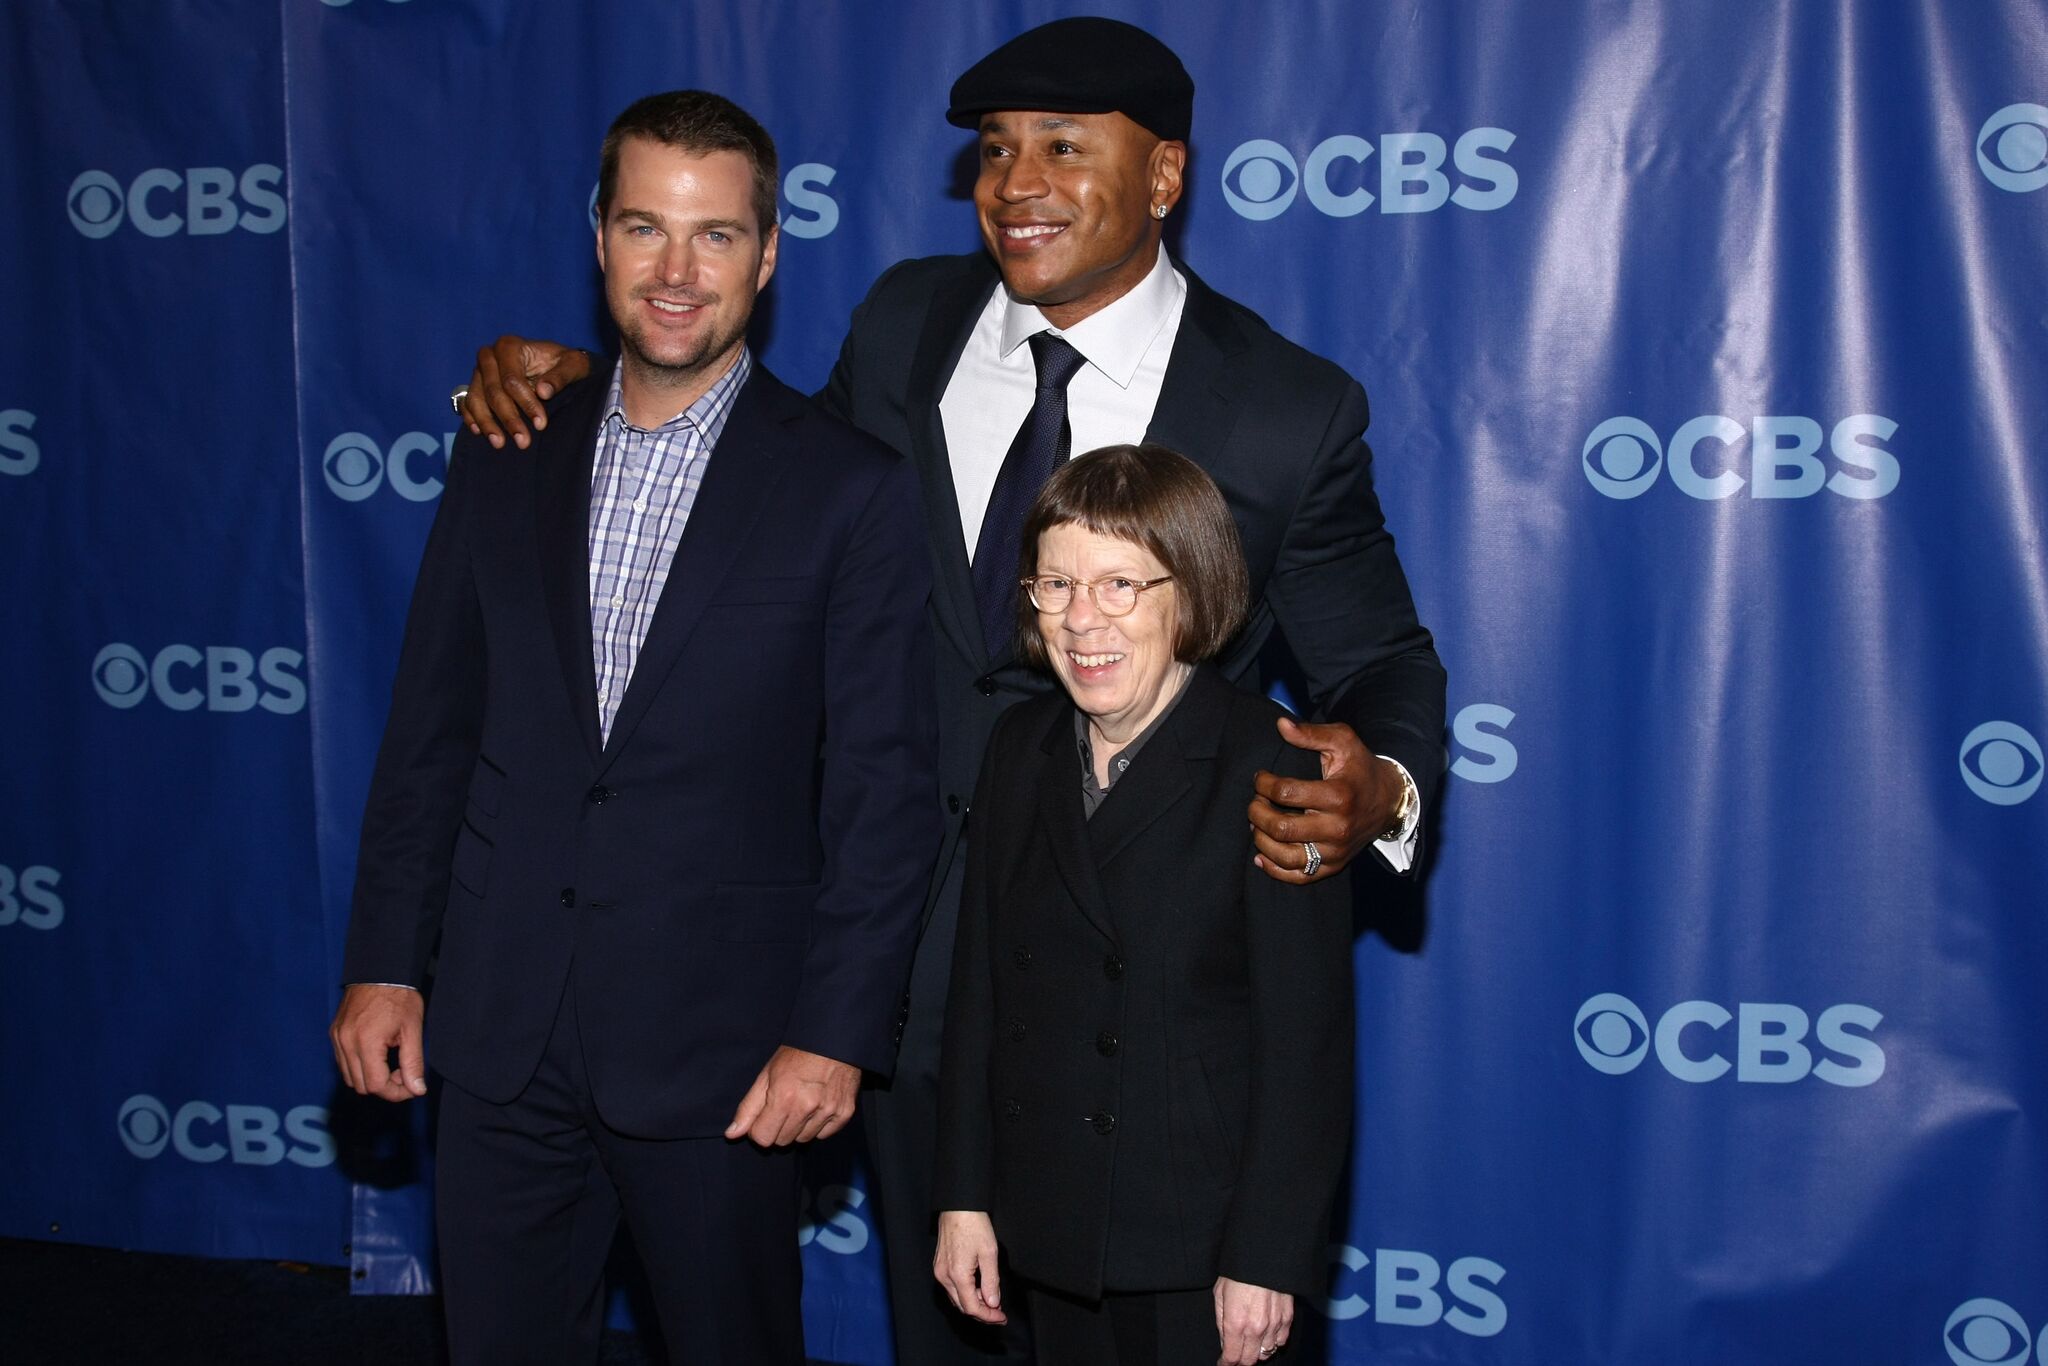 Chris O'Donnell, LL Cool J and Linda Hunt at the 2011 CBS Upfront on May 18, 2011  | Photo: GettyImages